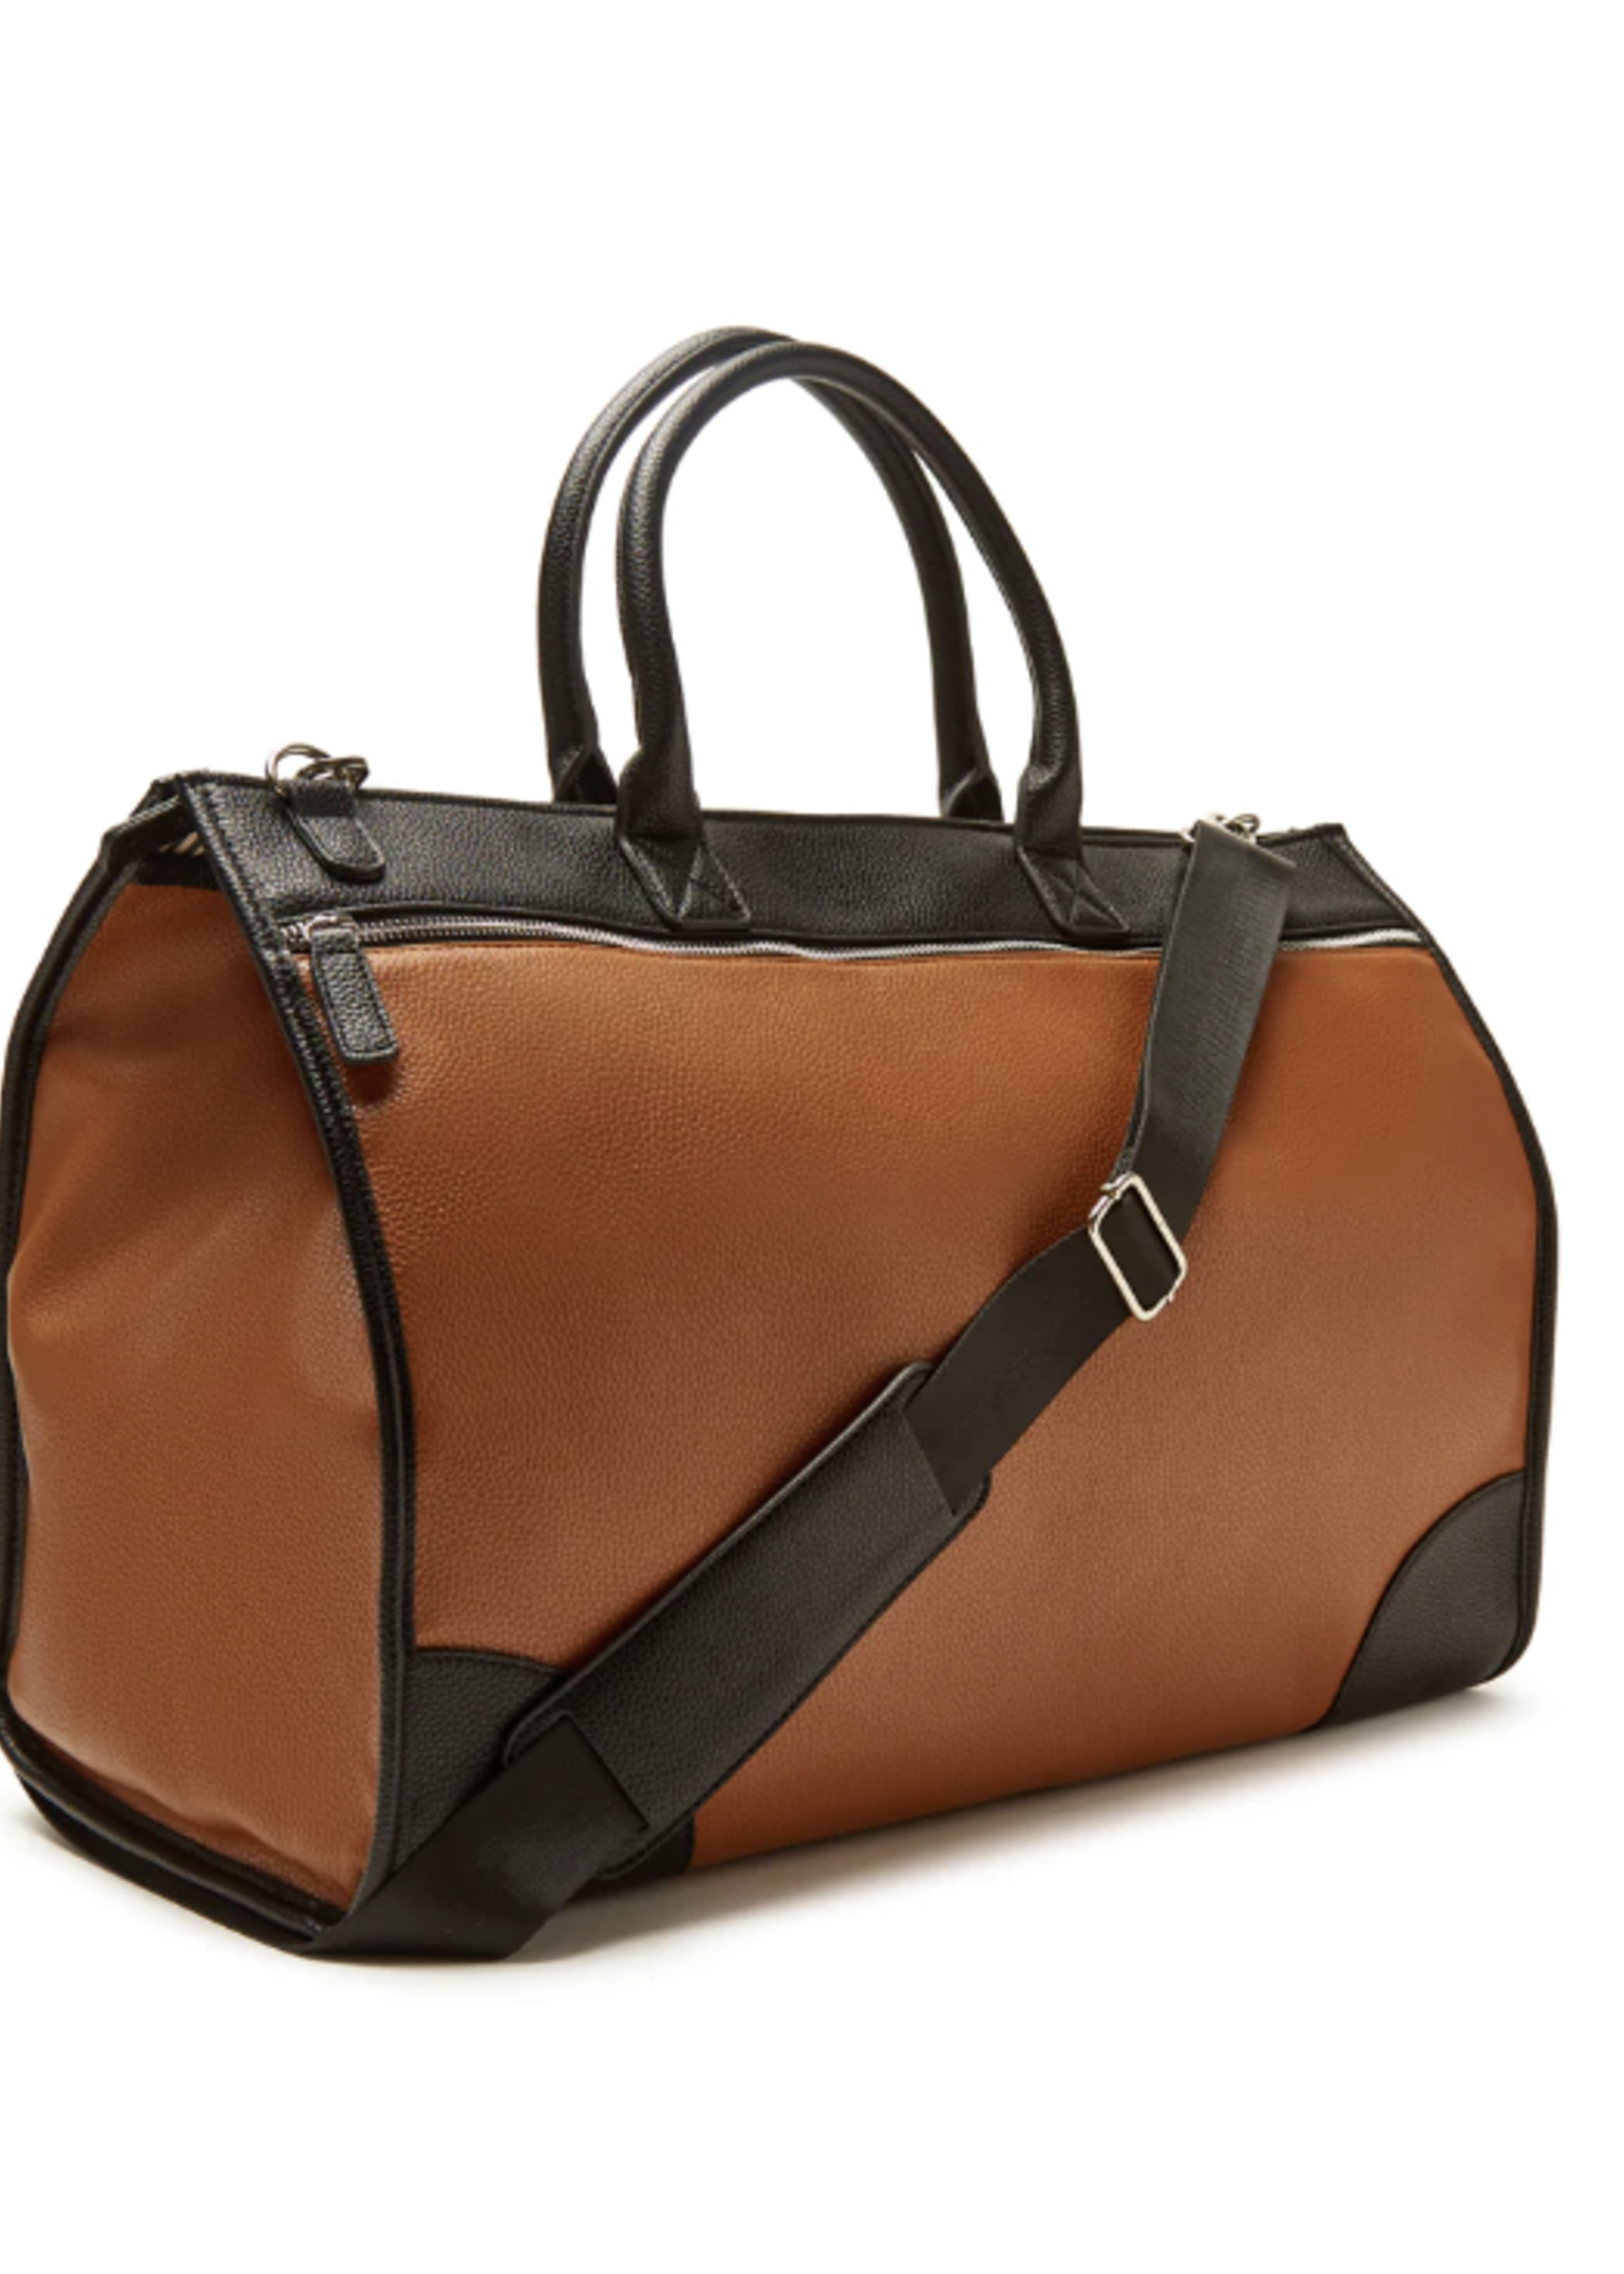 Brouk and Co Siena Boarding Bag